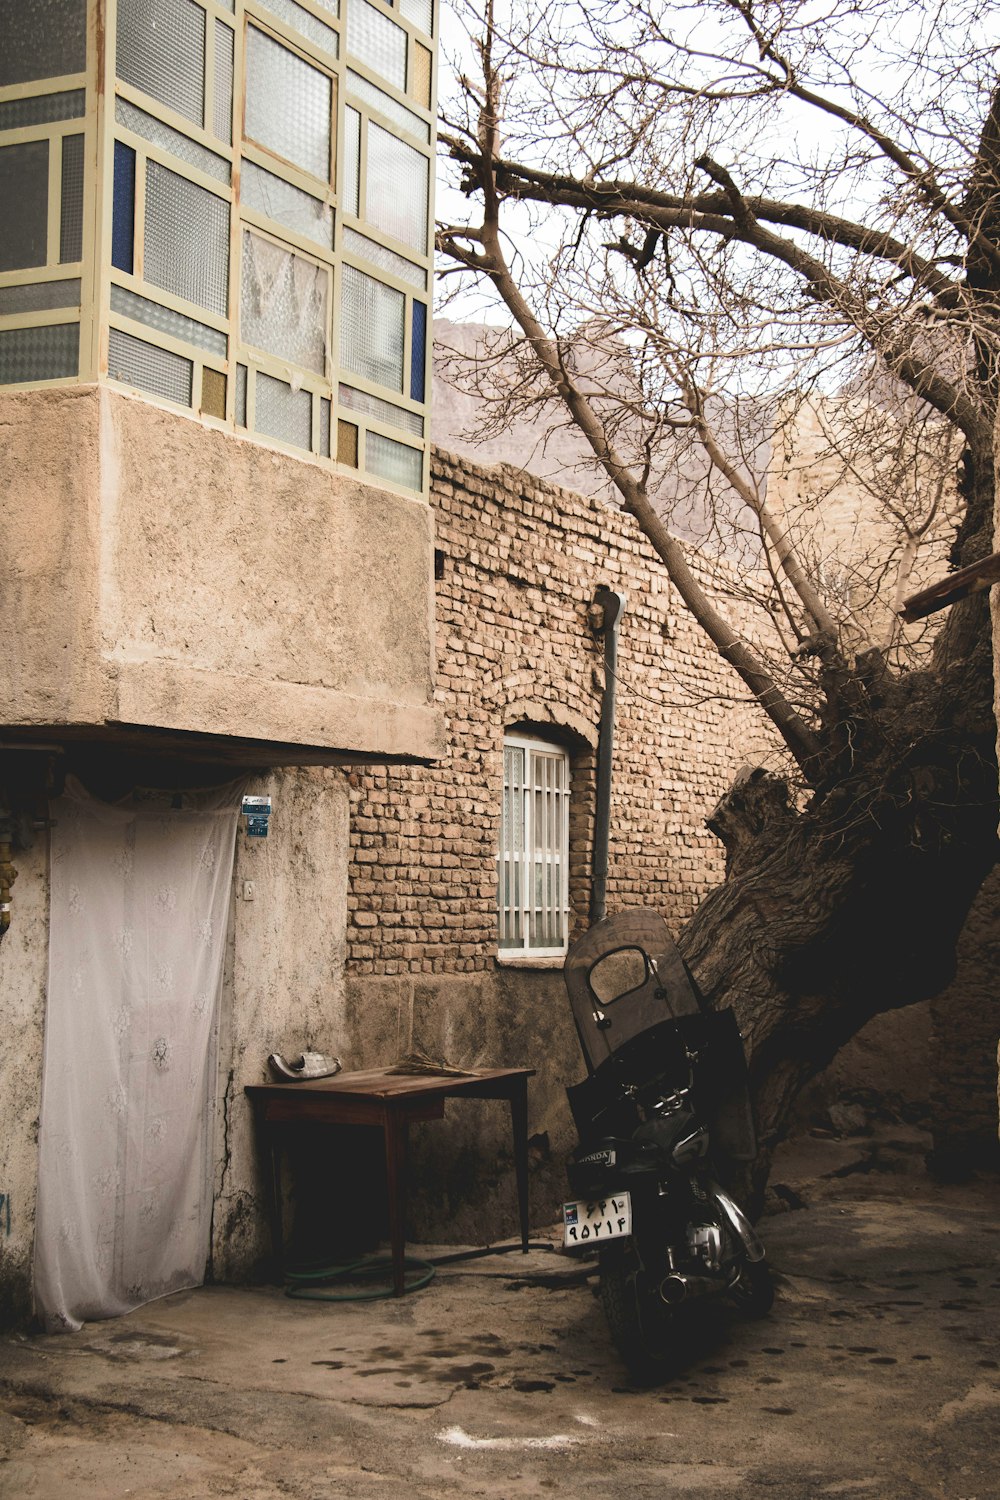 black motorcycle parked beside brown concrete building